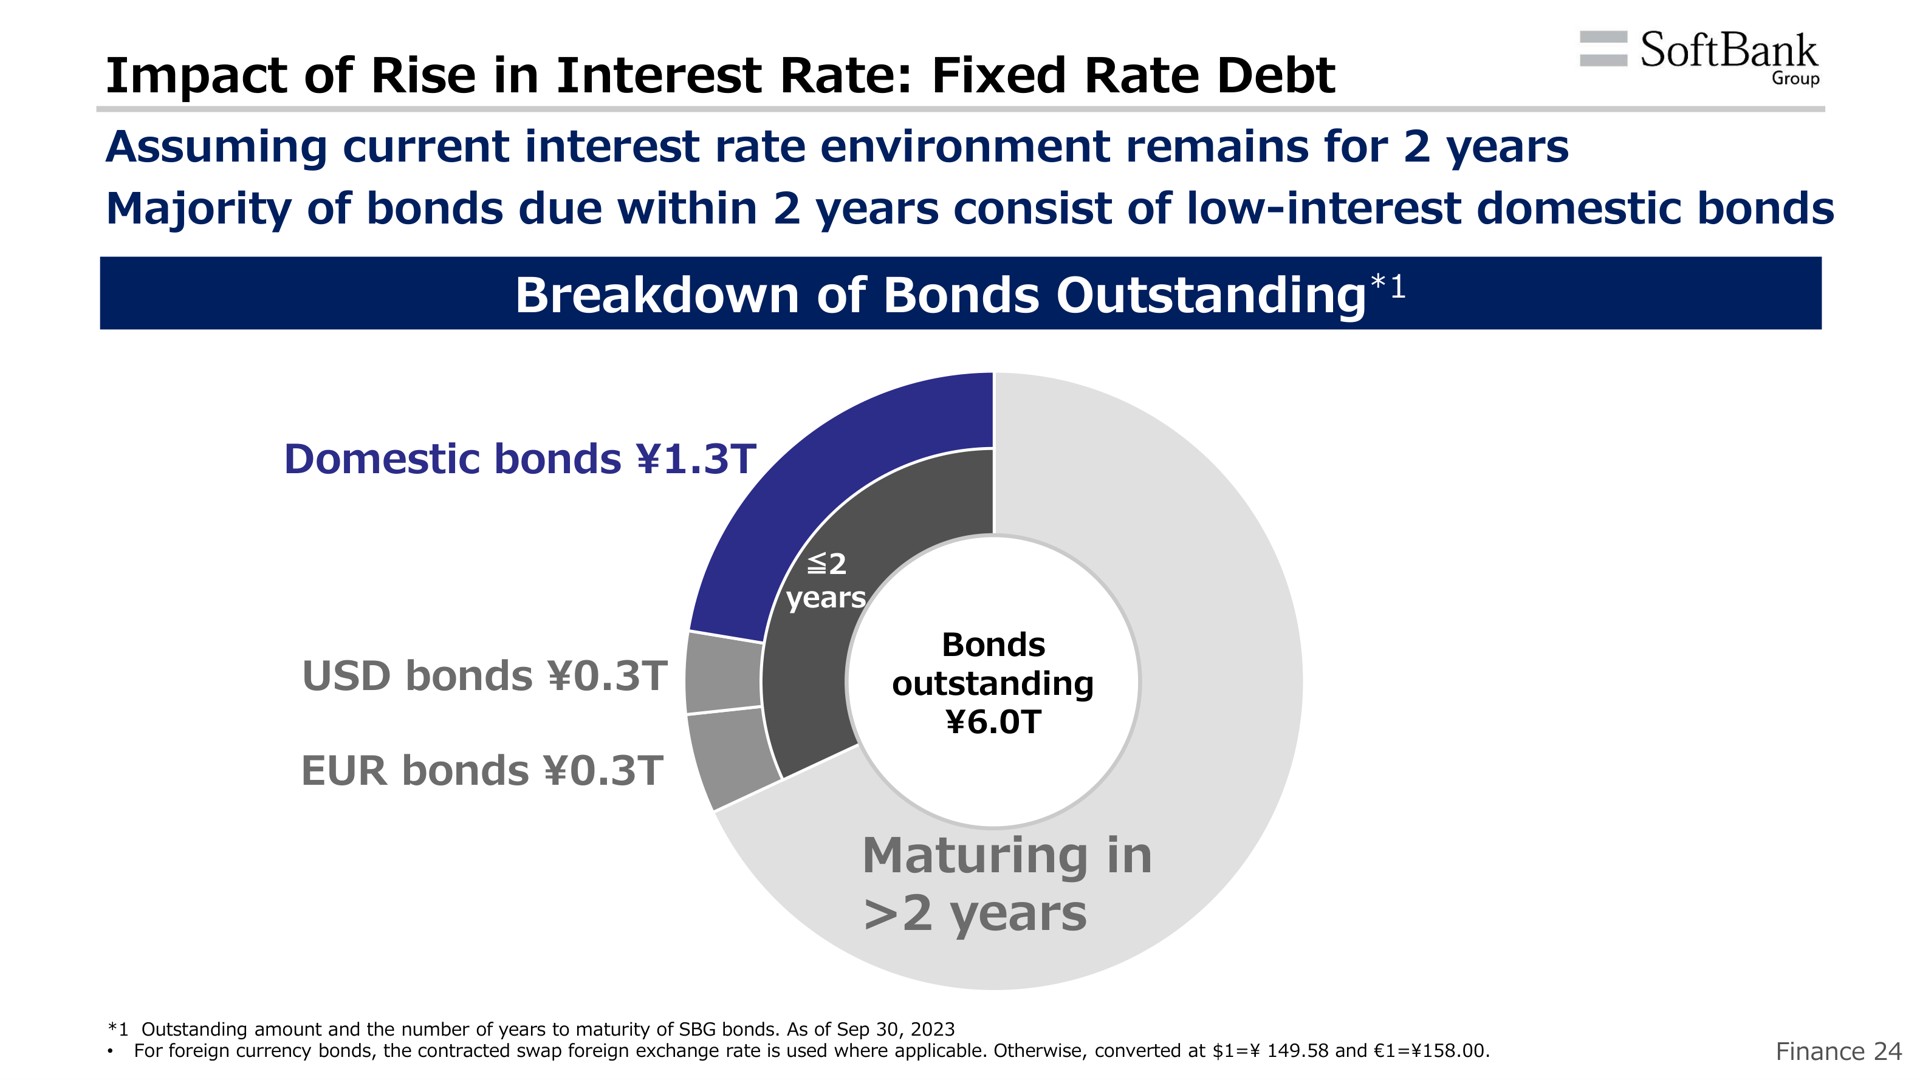 impact of rise in interest rate fixed rate debt breakdown of bonds outstanding maturing in years a | SoftBank